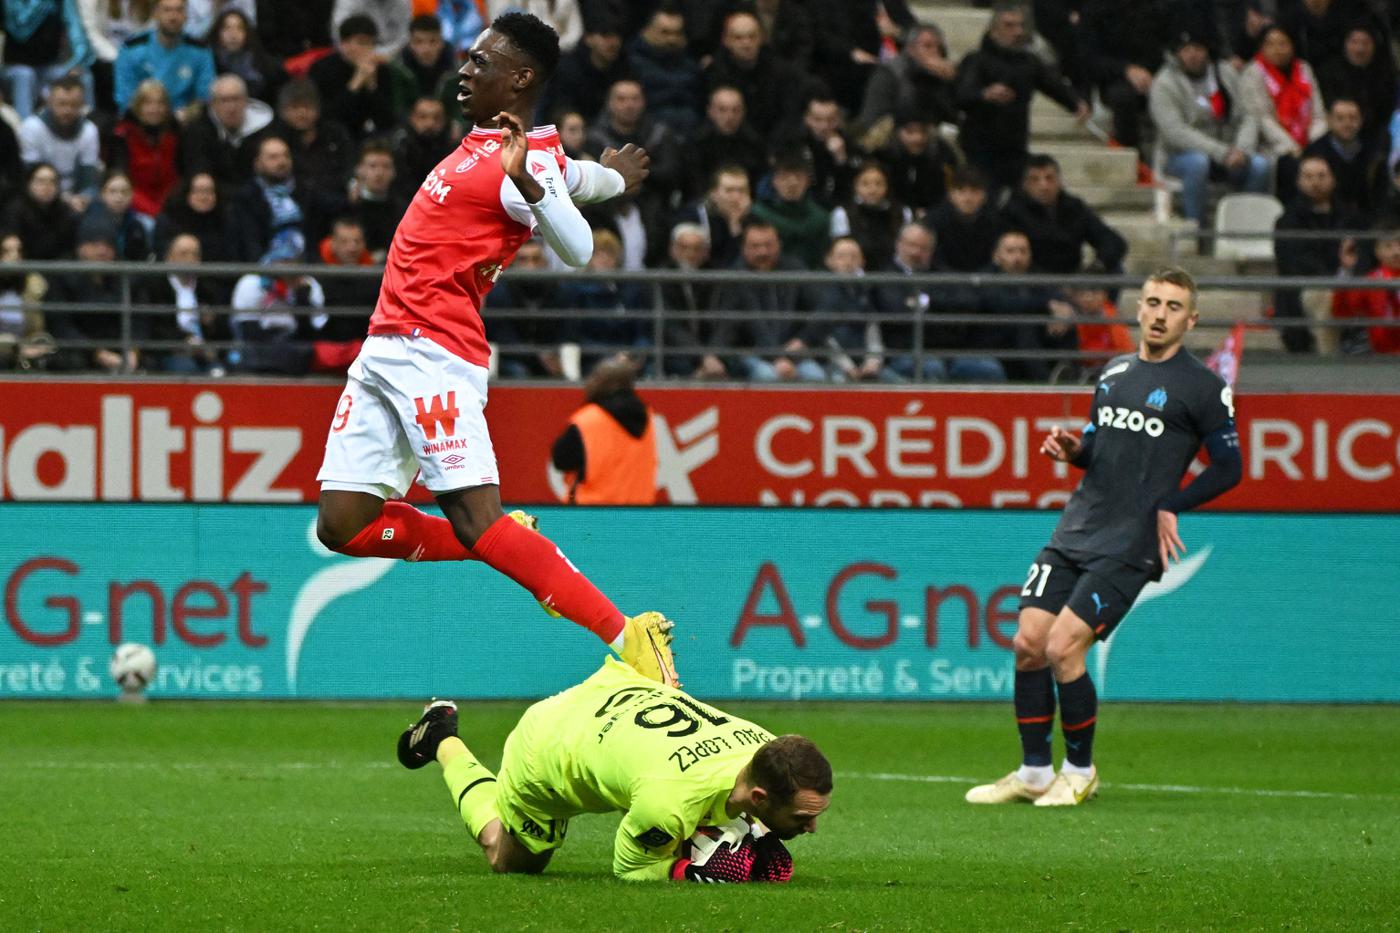 Reims - Marseille - 1:2. French Premier League, round of 28. Match review, statistics.